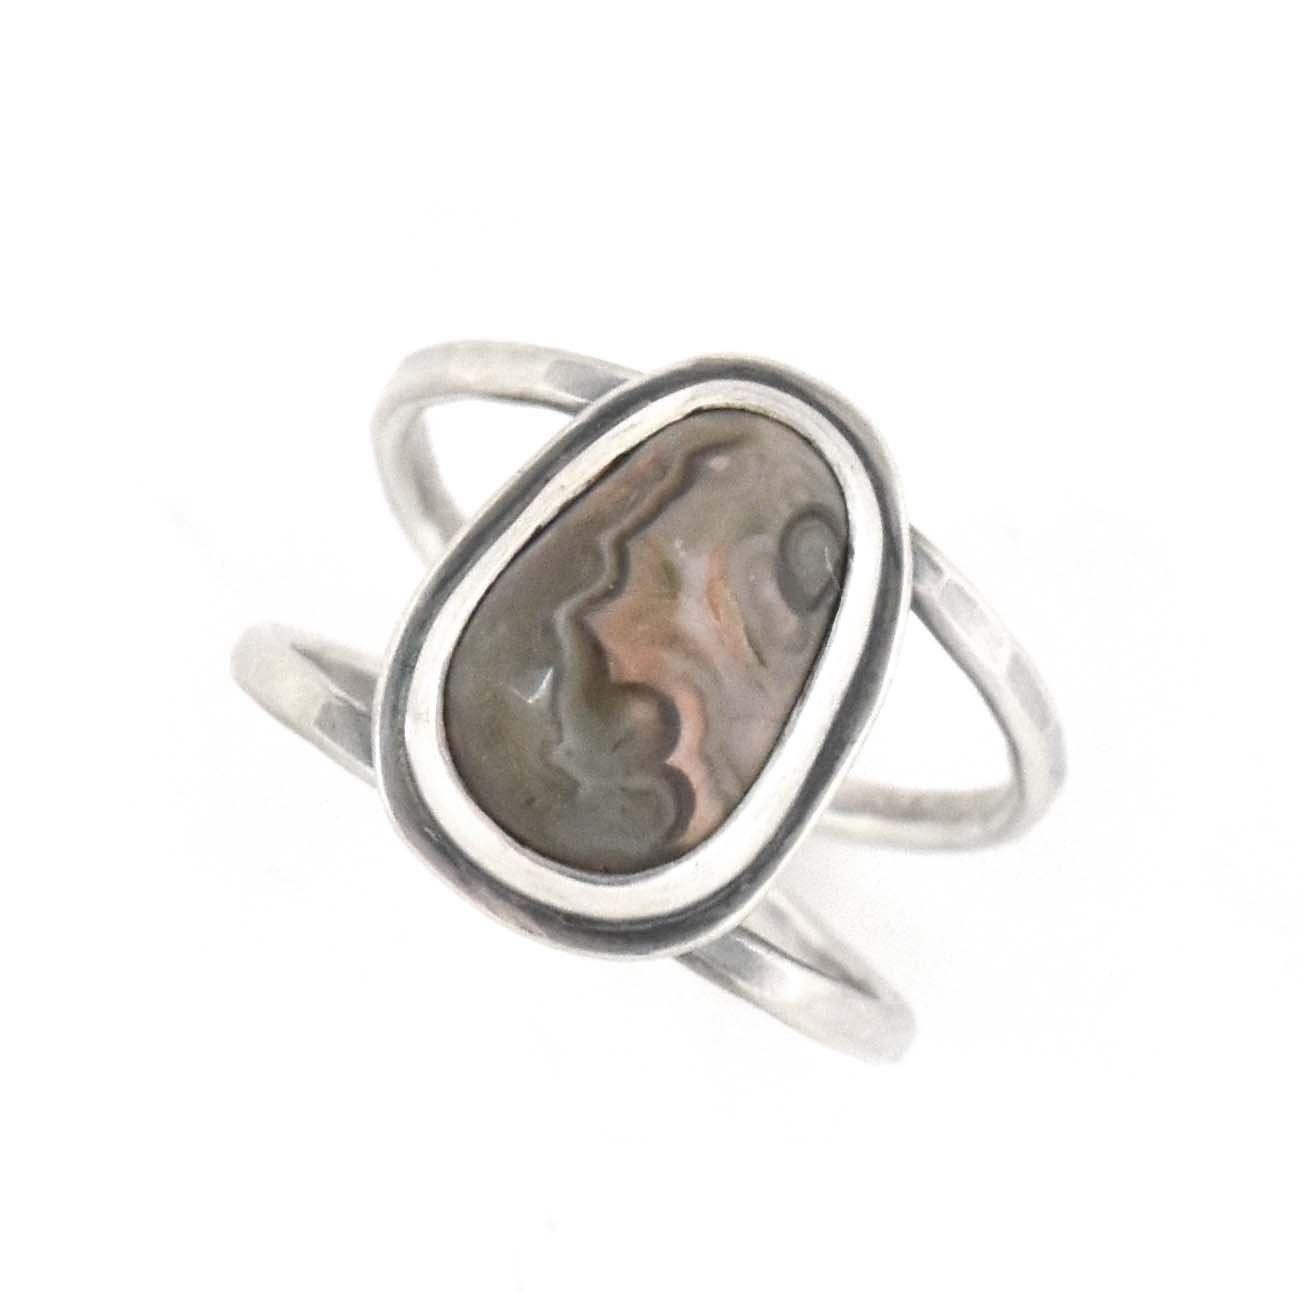 Lake Superior Agate Ring - Size 8.5 - Ring   5688 - handmade by Beth Millner Jewelry